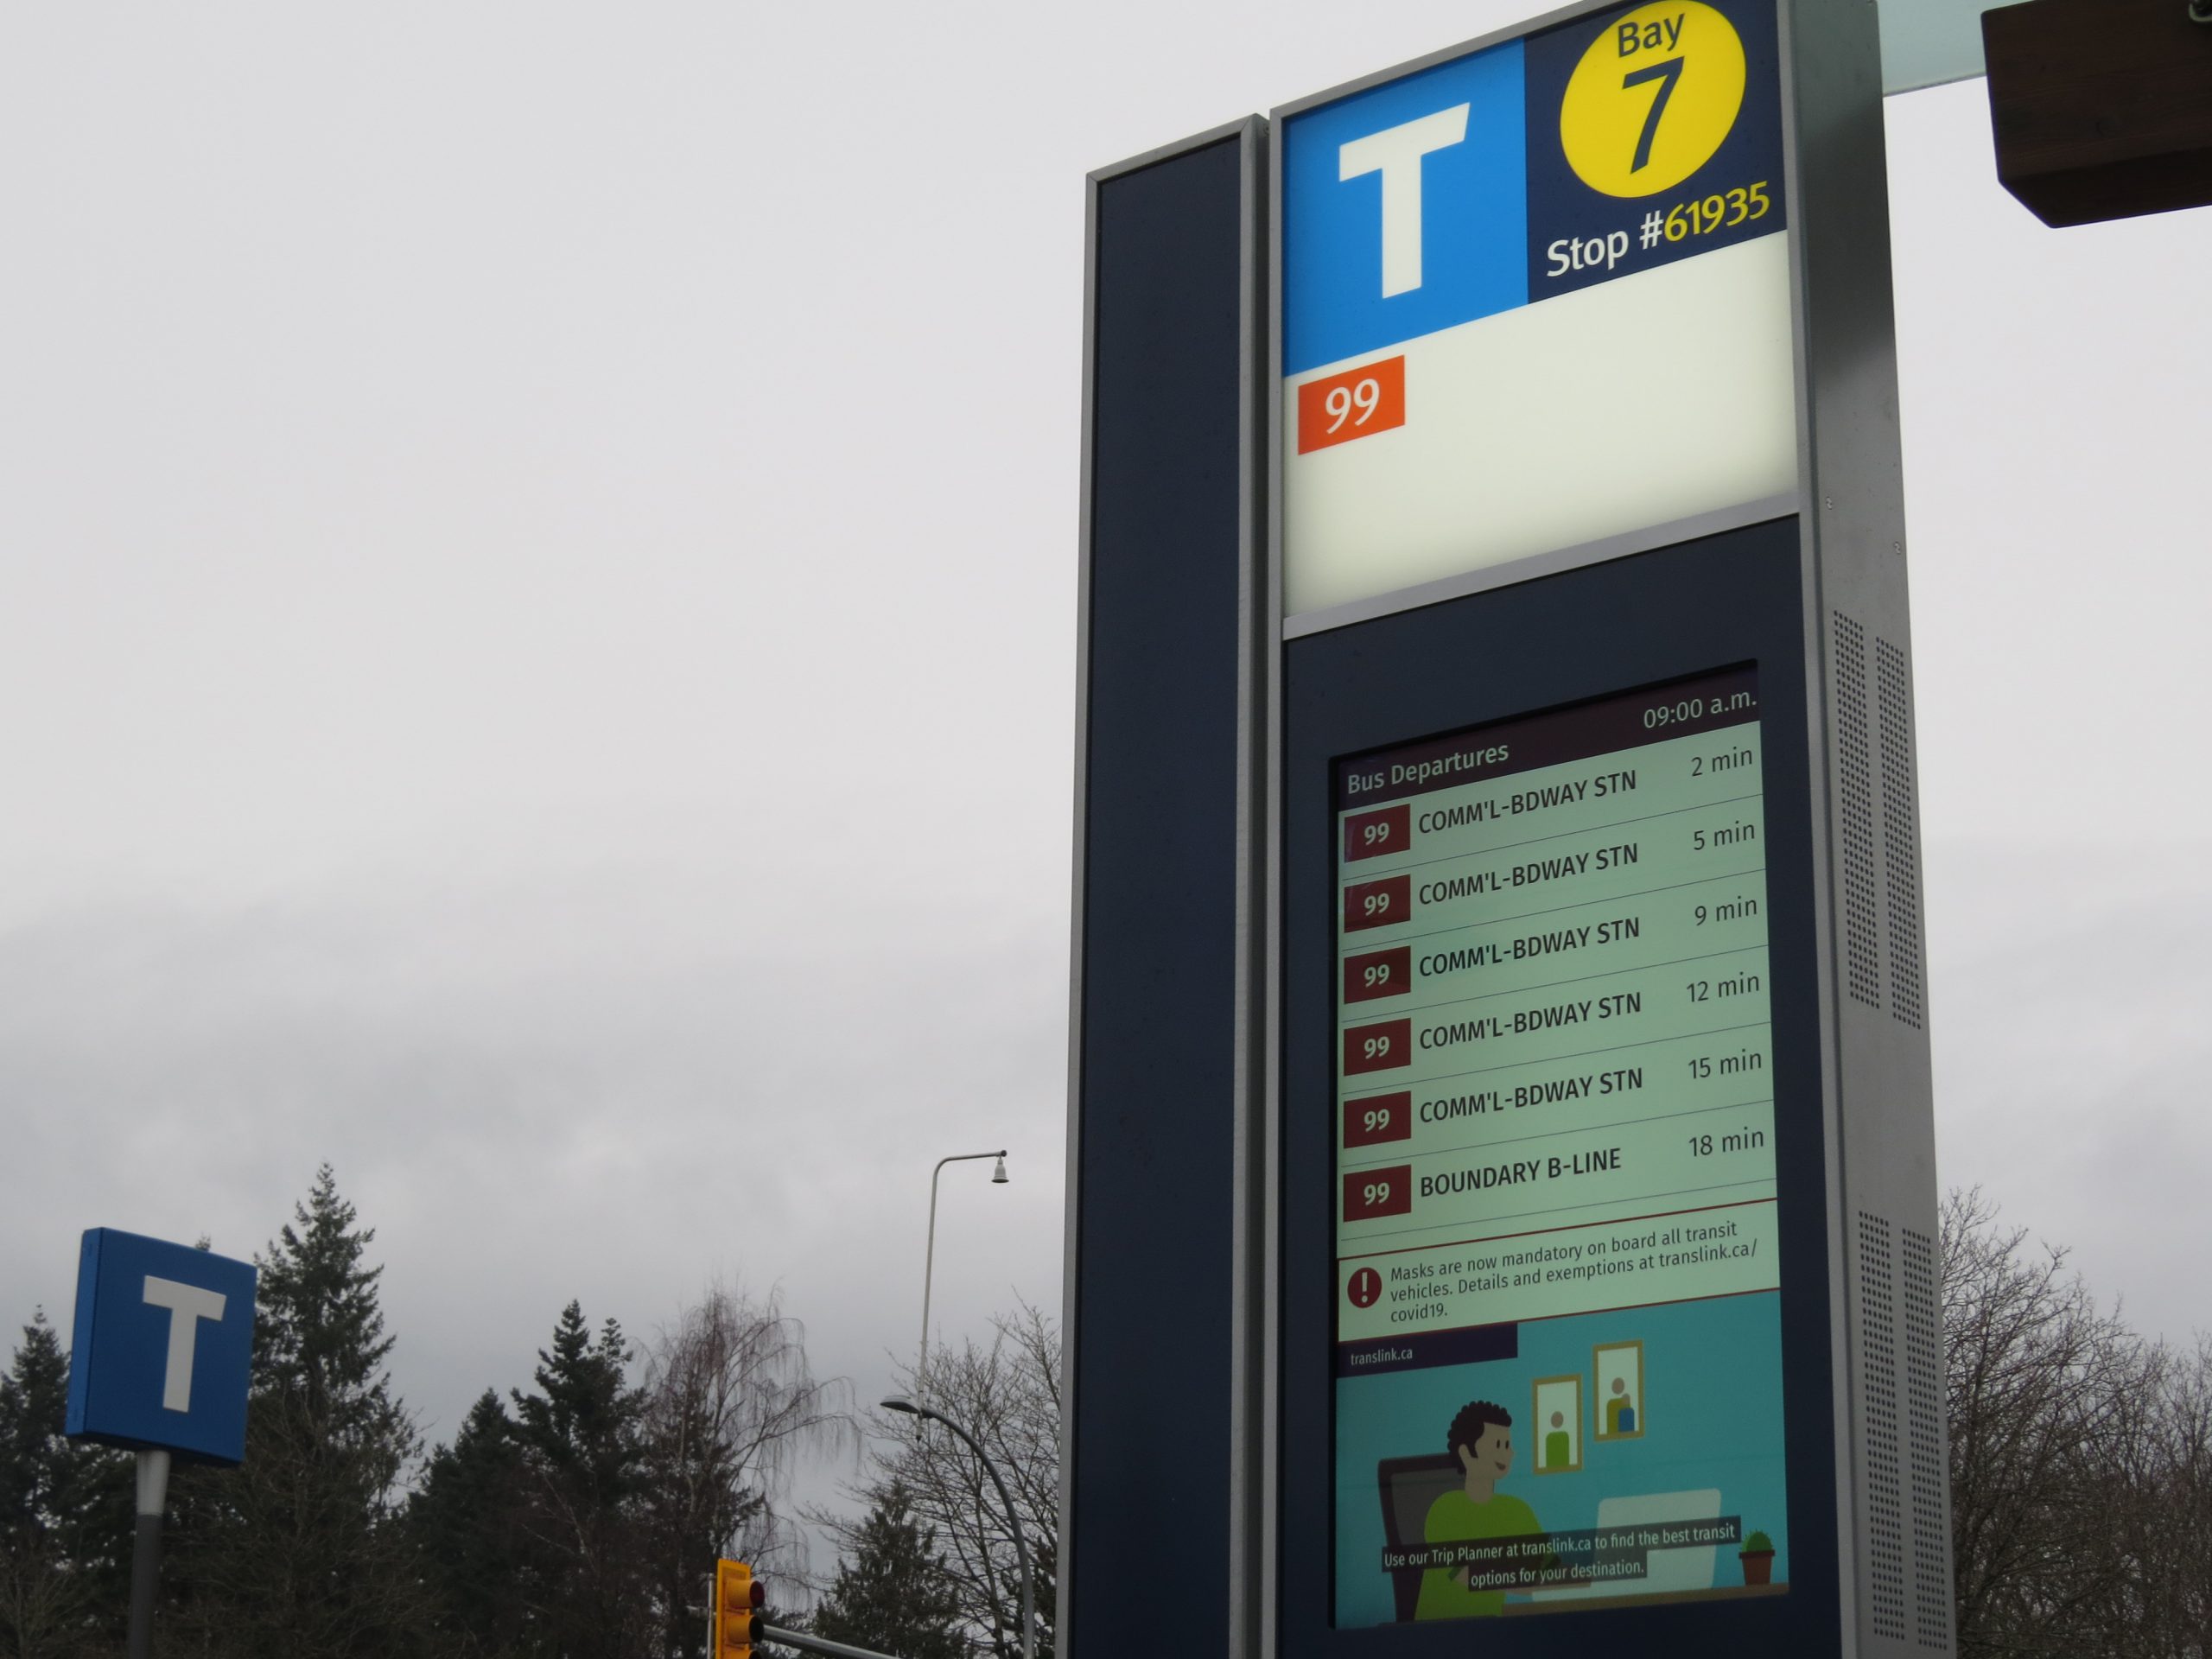 Bay 7 at the UBC Exchange with the new next-bus screens